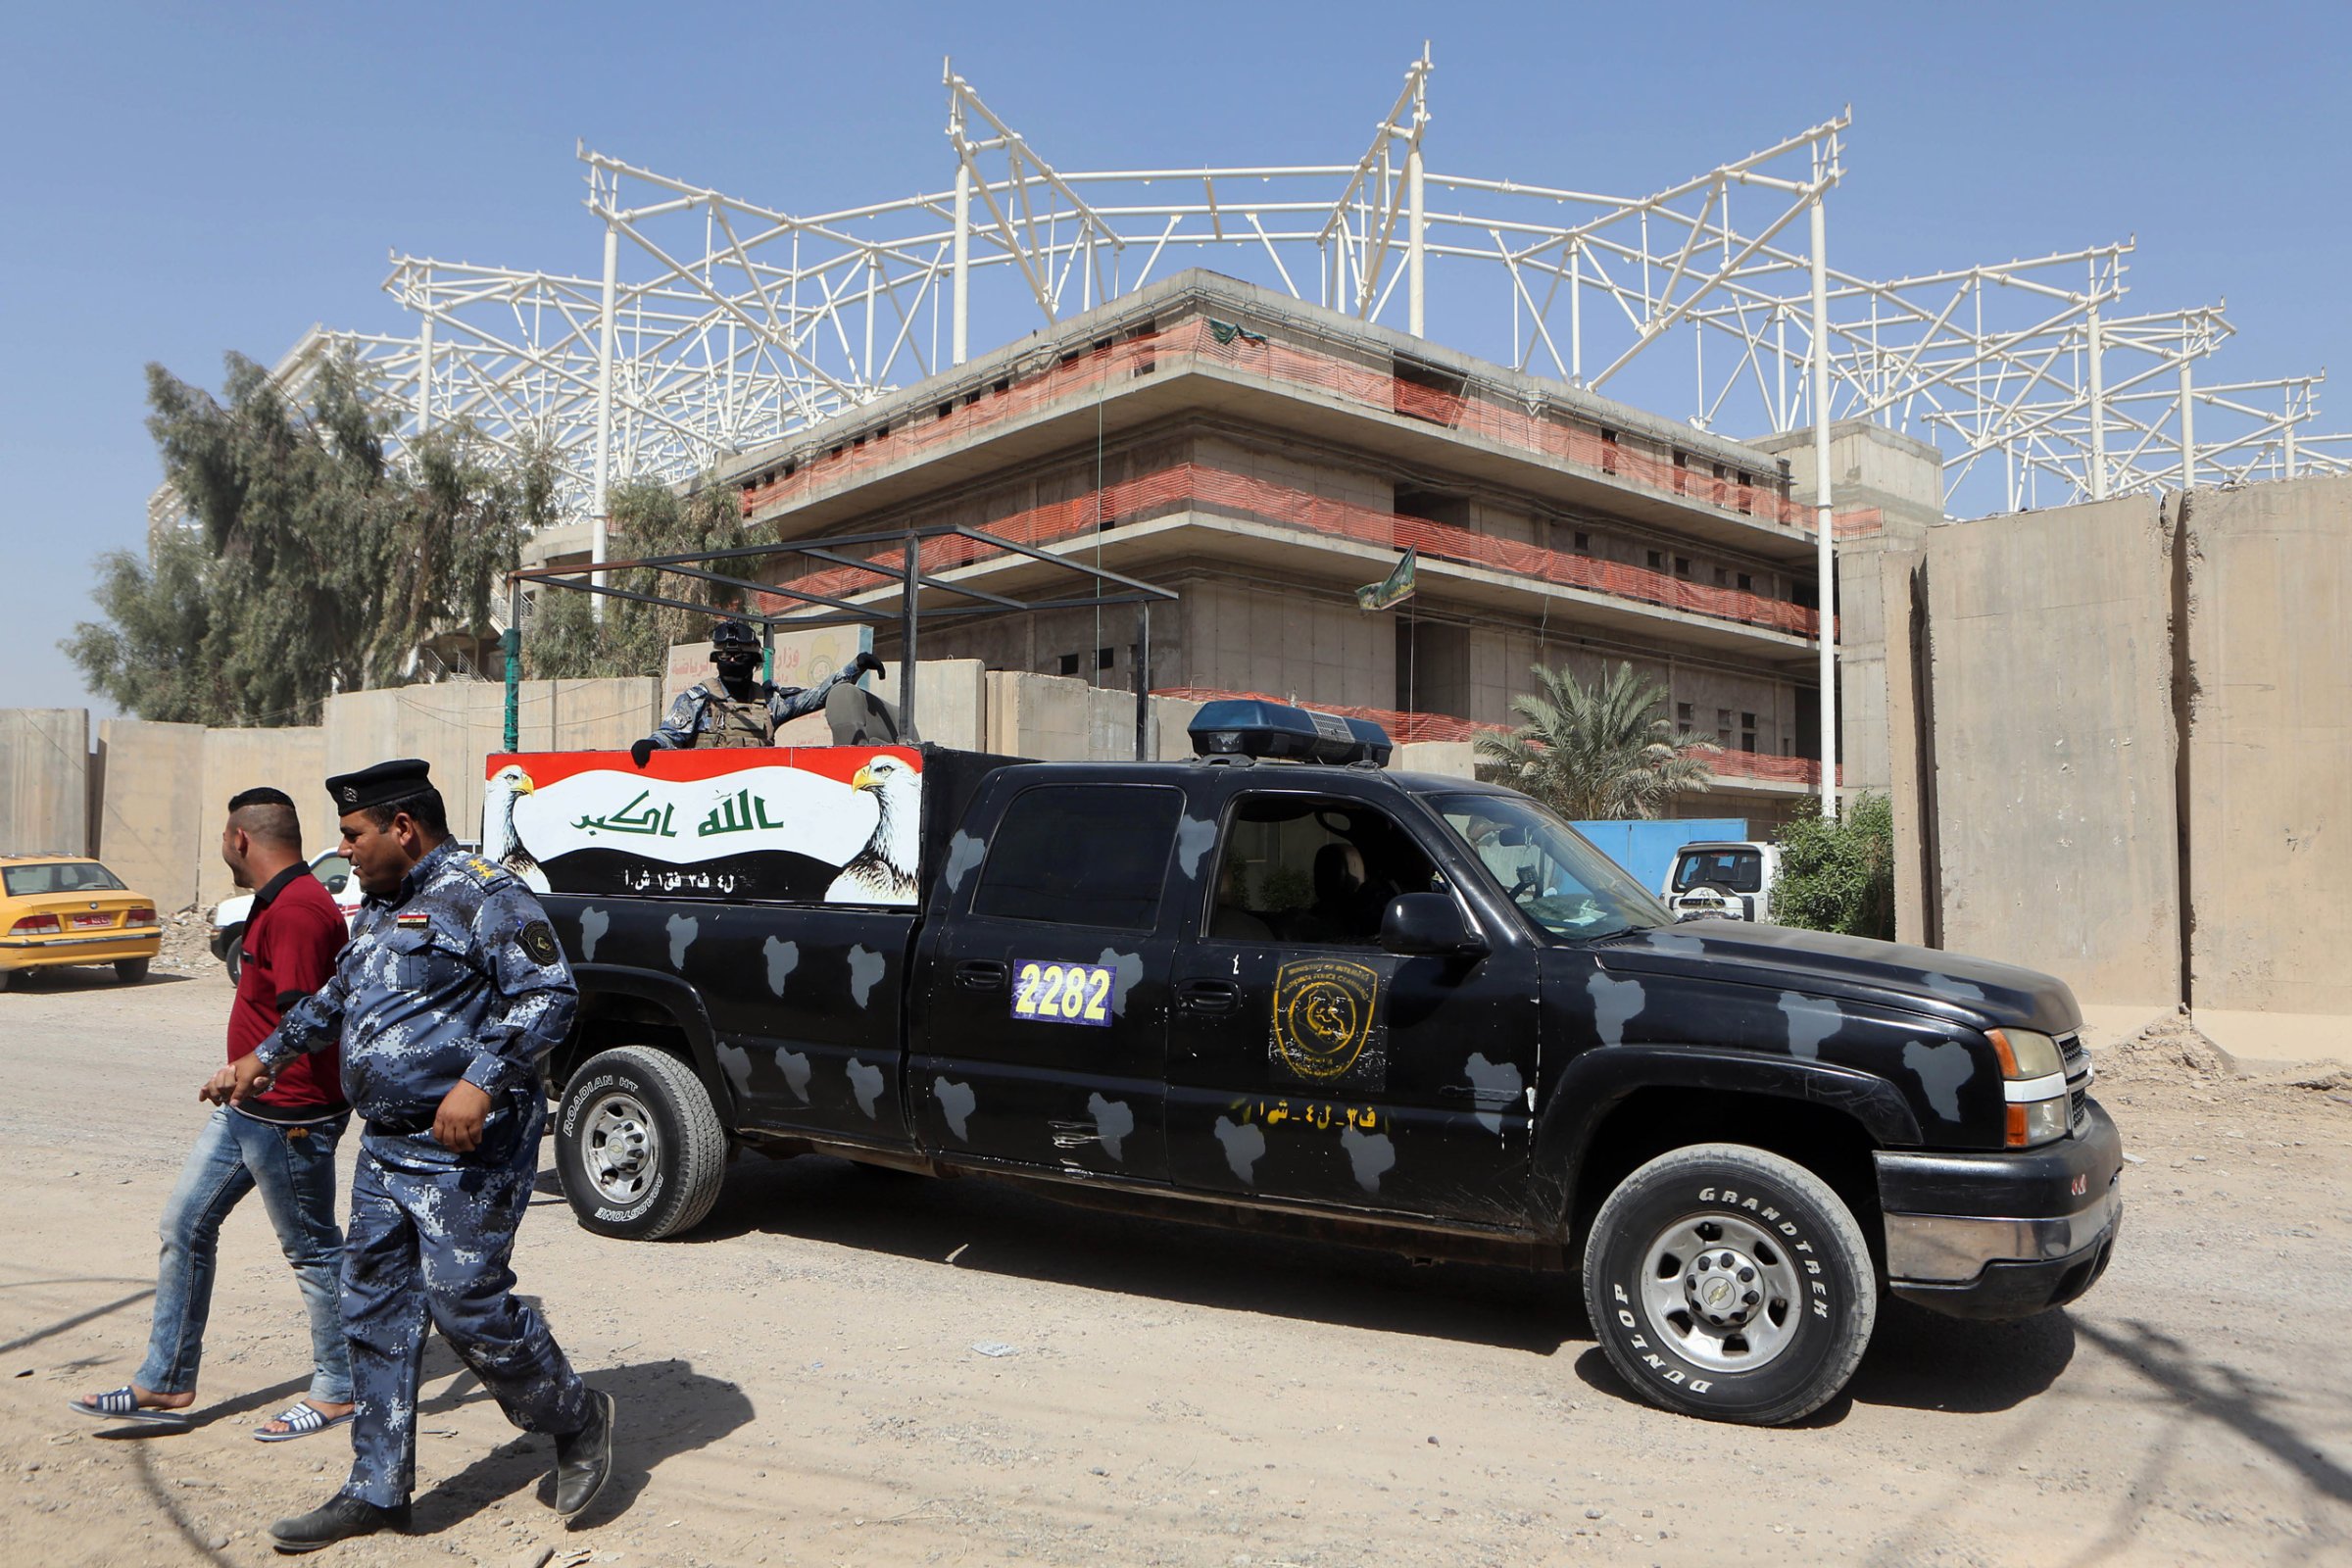 Iraqi security forces guard the entrance to a sports complex being built by a Turkish construction company, in the Shiite district of Sadr City, Baghdad, Iraq, Wednesday, Sept. 2, 2015. Masked men in military uniforms kidnapped 18 Turkish workers and engineers working at the site in Baghdad at dawn Wednesday, bundling them into several SUVs and speeding away, Iraqis security officials said. (AP Photo/Khalid Mohammed)